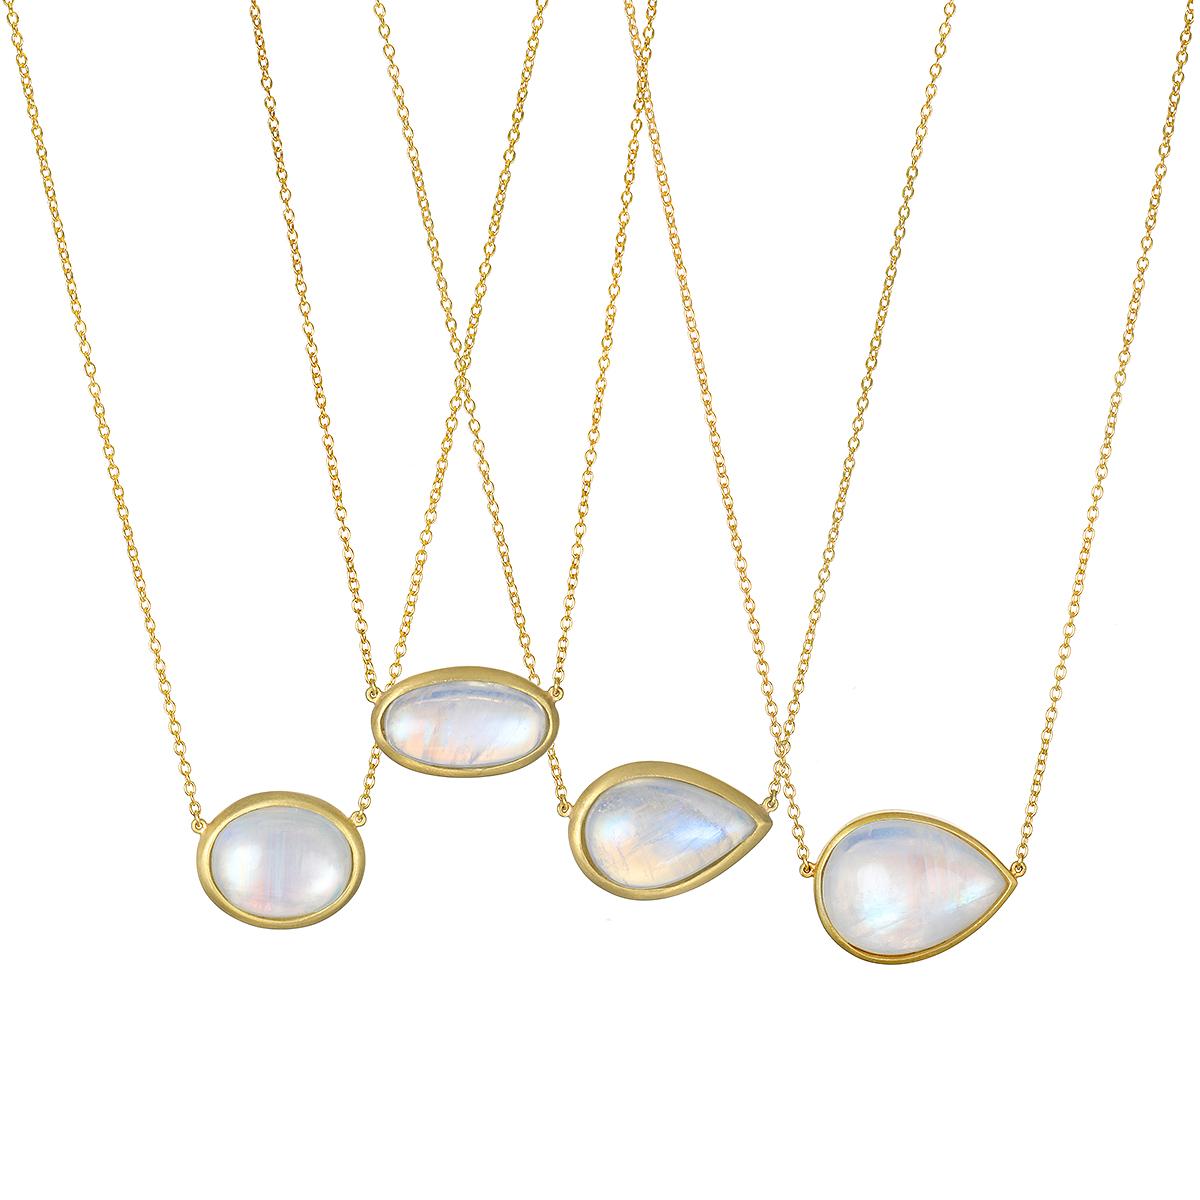 One of a Kind
Faye Kim's Rainbow oval moonstone necklace is full of light and reflects beautiful translucent blue hues. The shape, polish, and matte gold enhances the moonstones striking rainbow effect. Handcrafted in 18k gold* with a classic jump